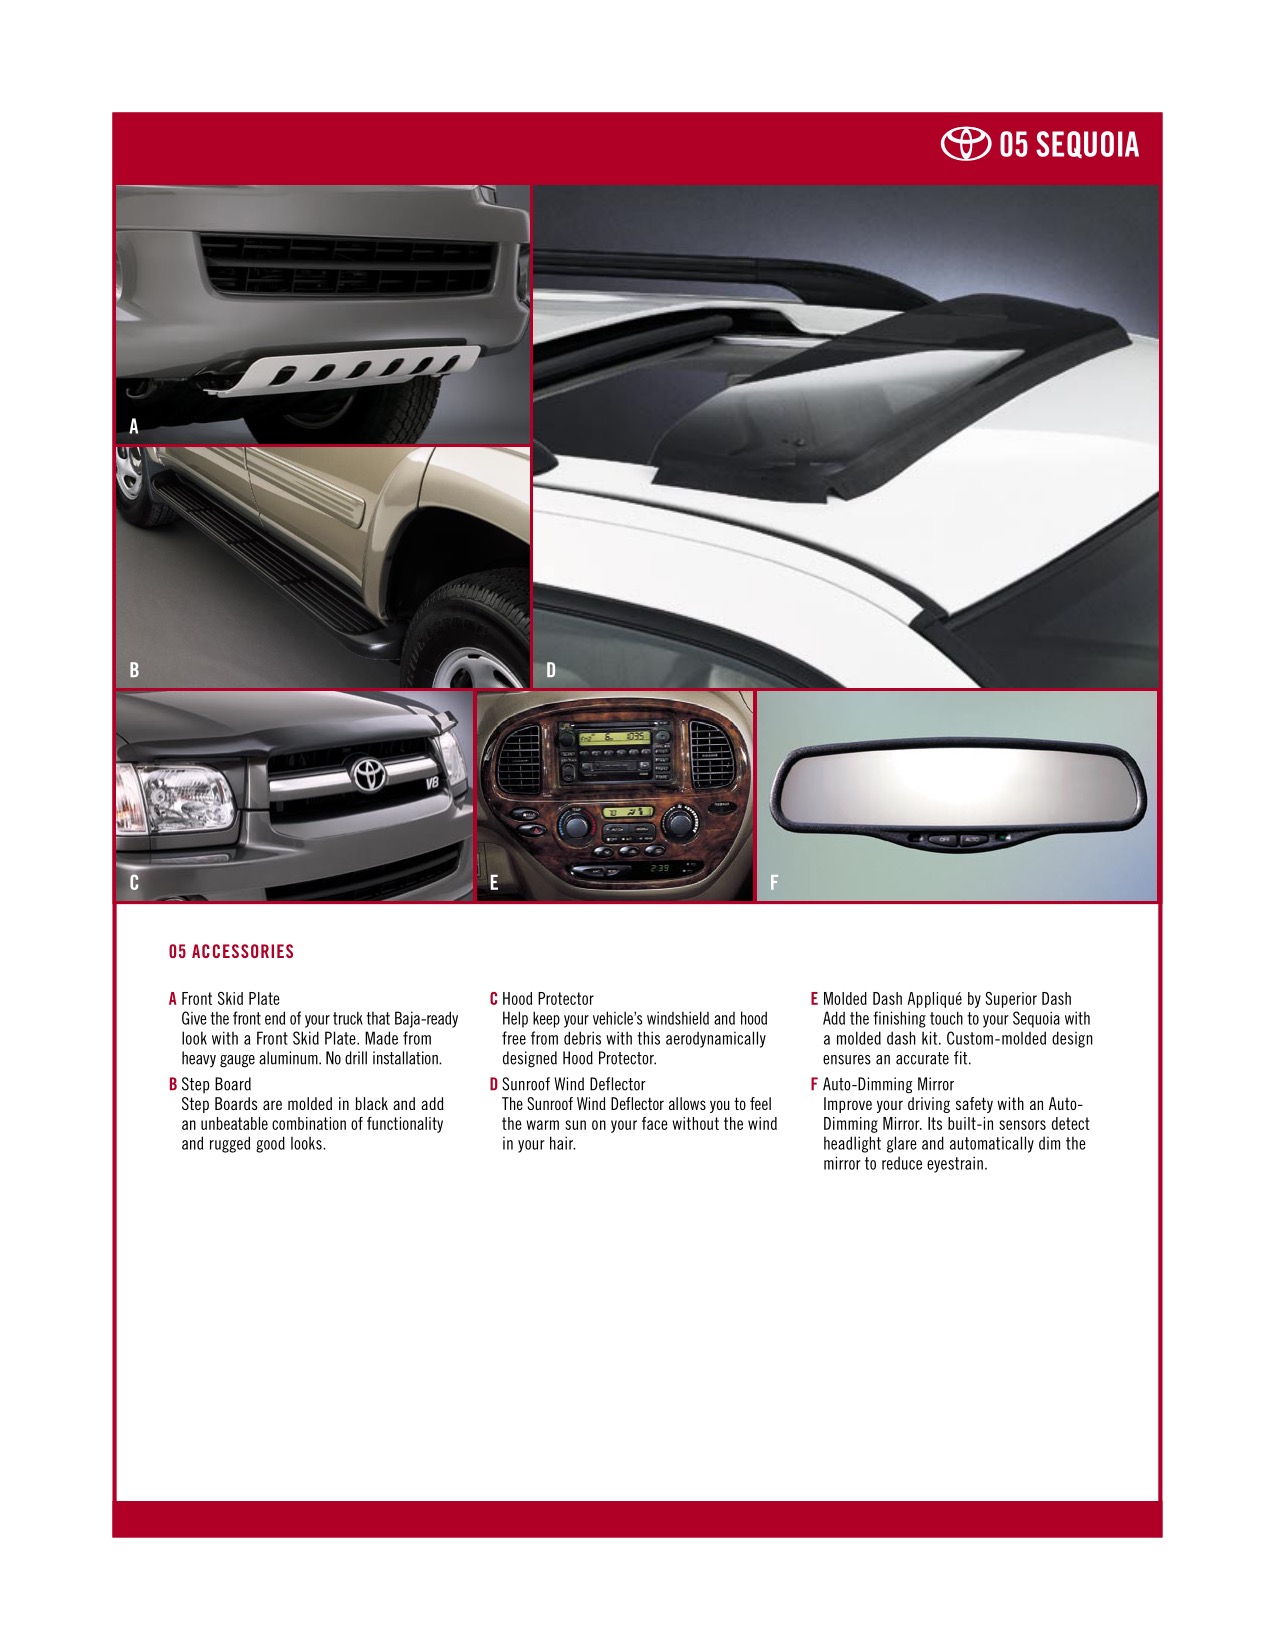 2005 Toyota Sequoia Brochure Page 8